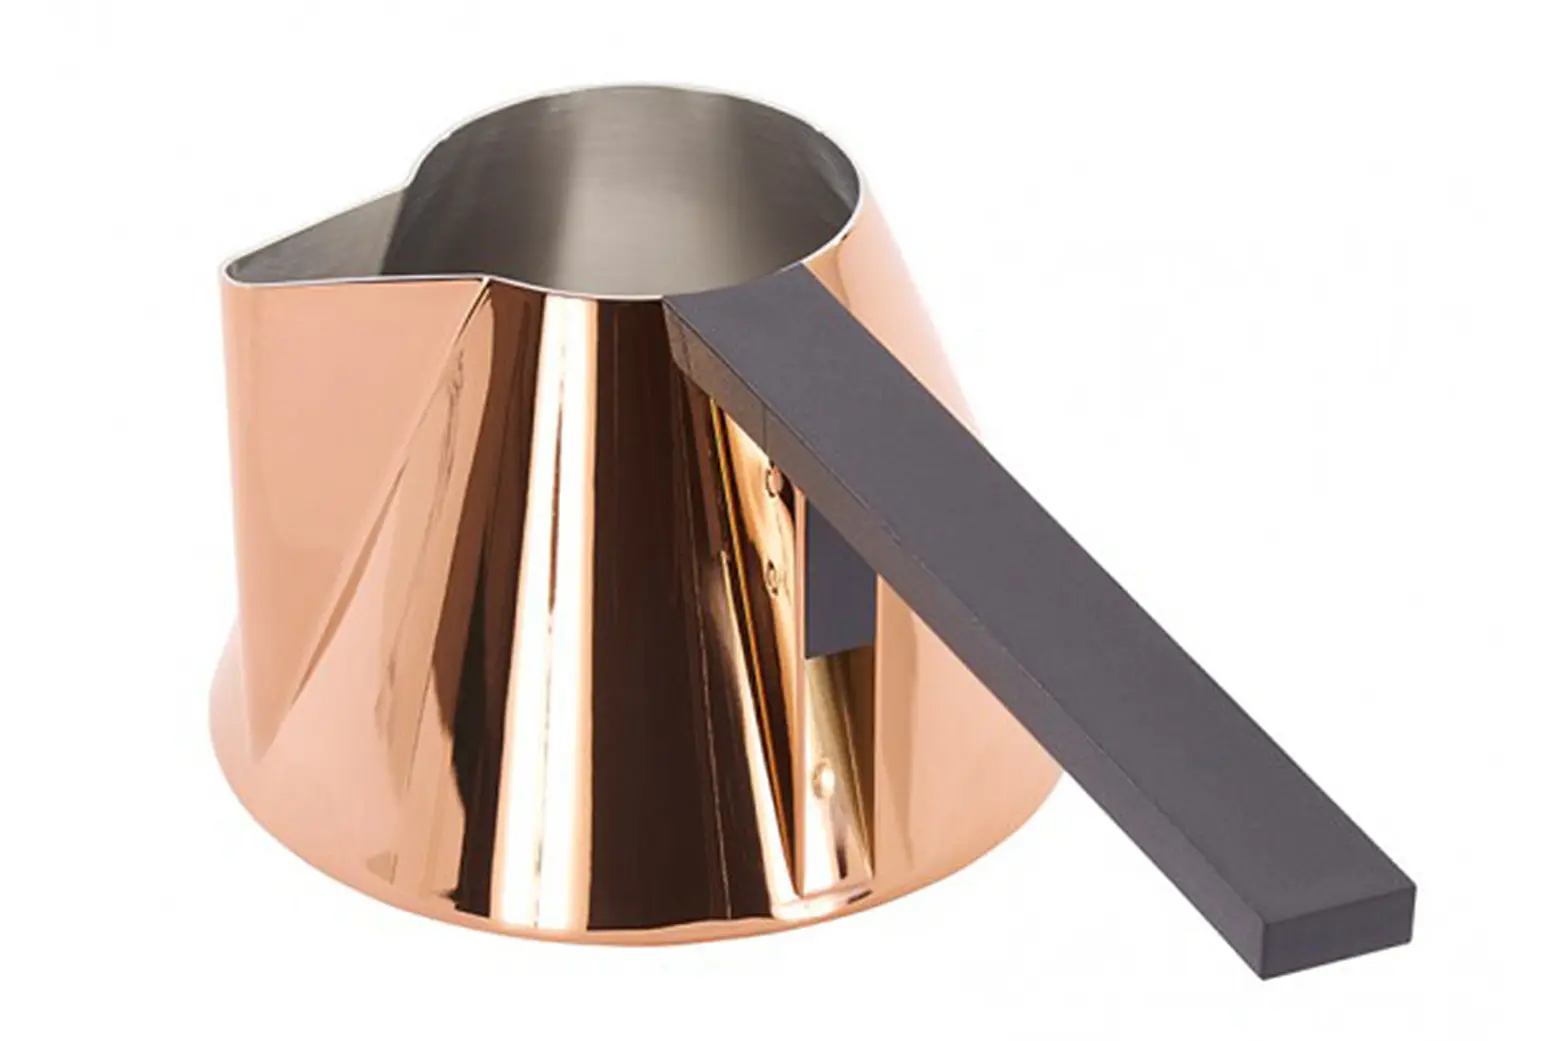 Tom Dixon, British design, tribute to coffee making, copper coffee set, Brew Coffee Collection, stainless steel set,